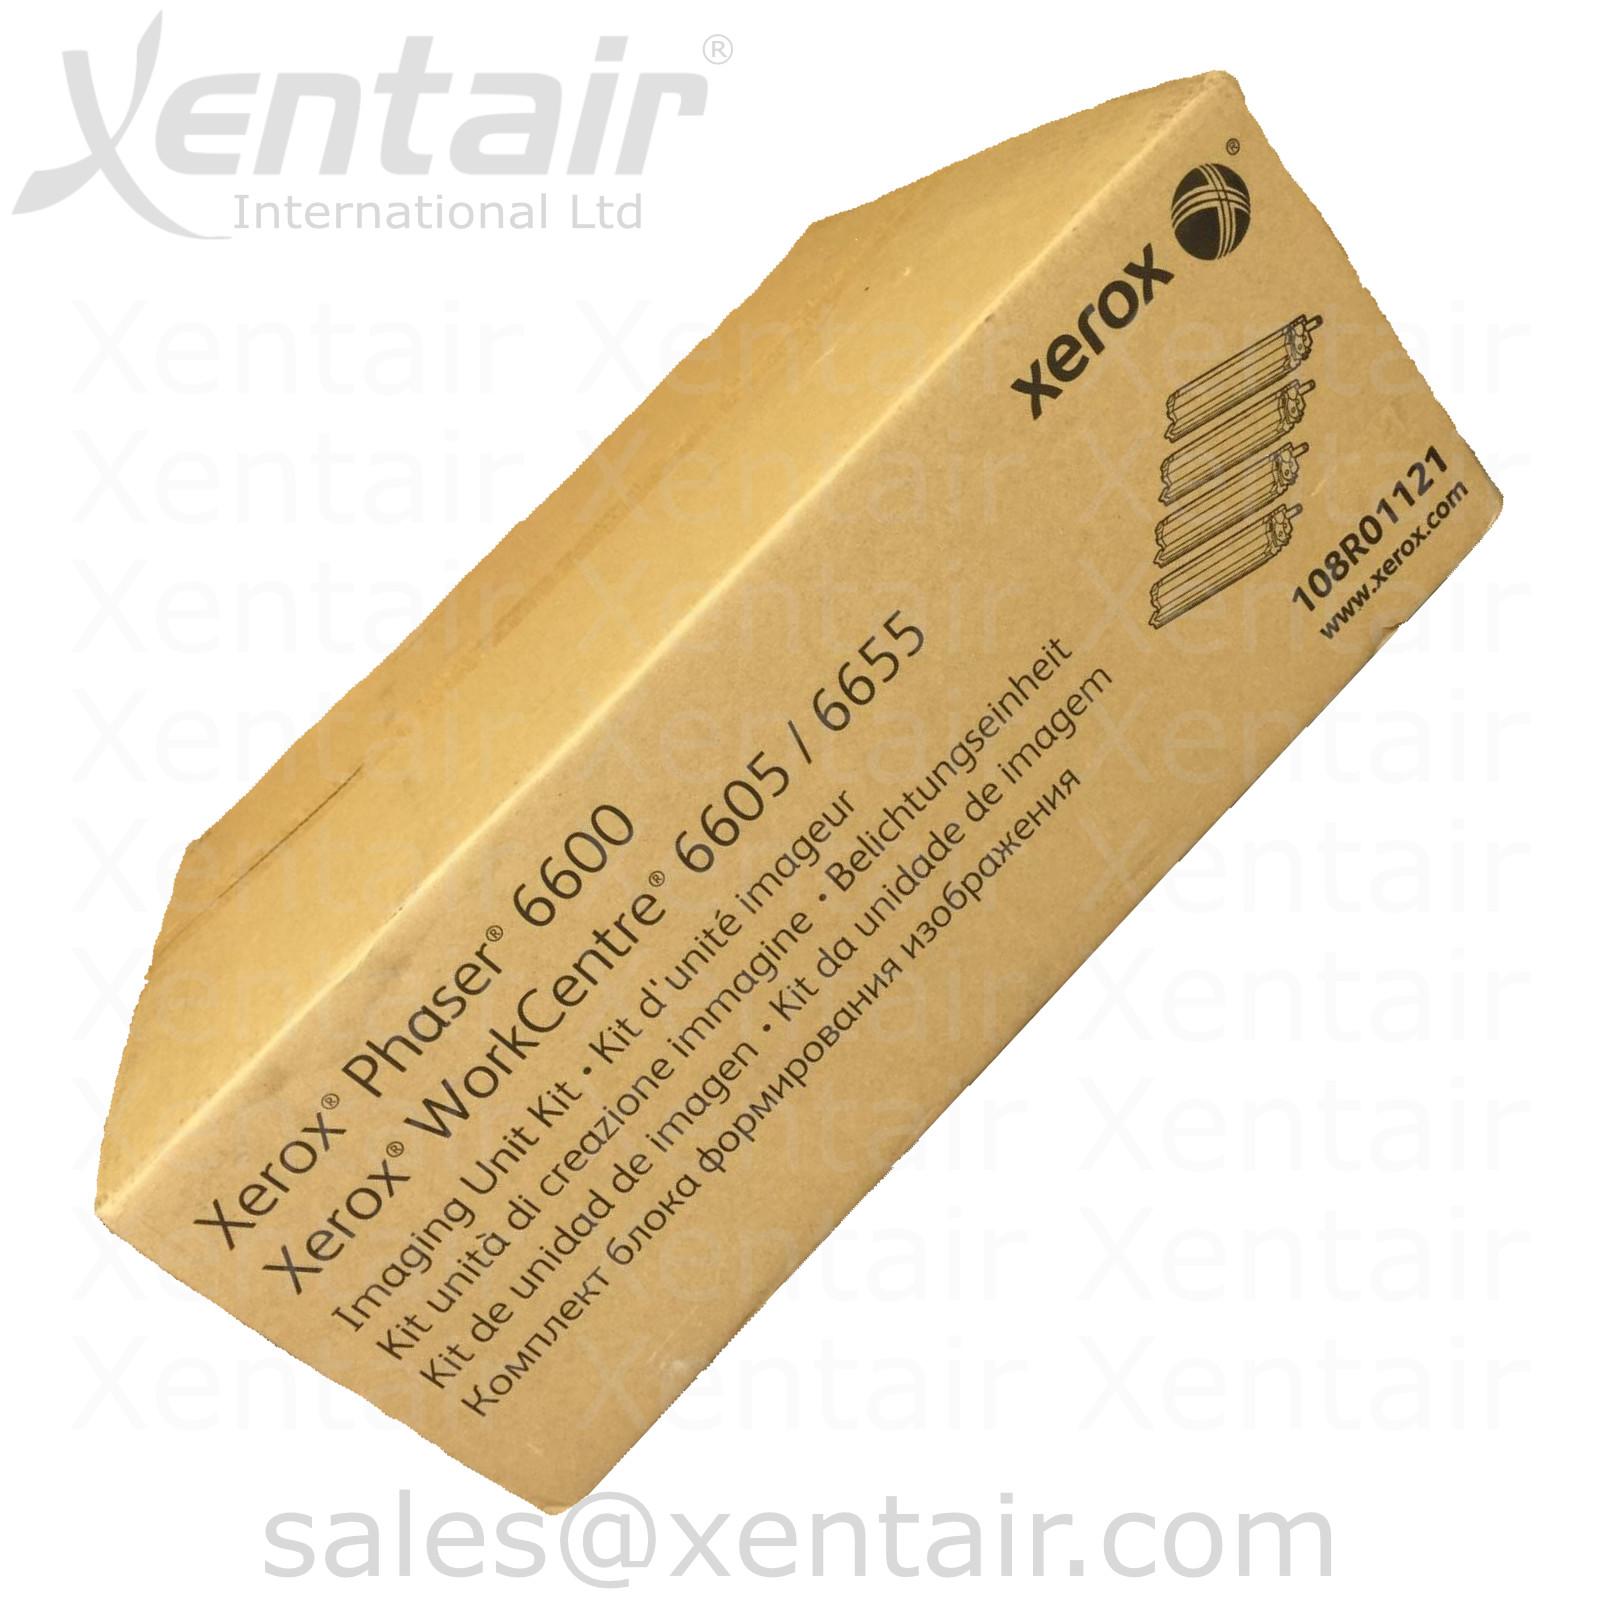 Xerox® Phaser™ 6600 WorkCentre™ 6605 4 x Imaging Unit Kit 108R01121 108R1121